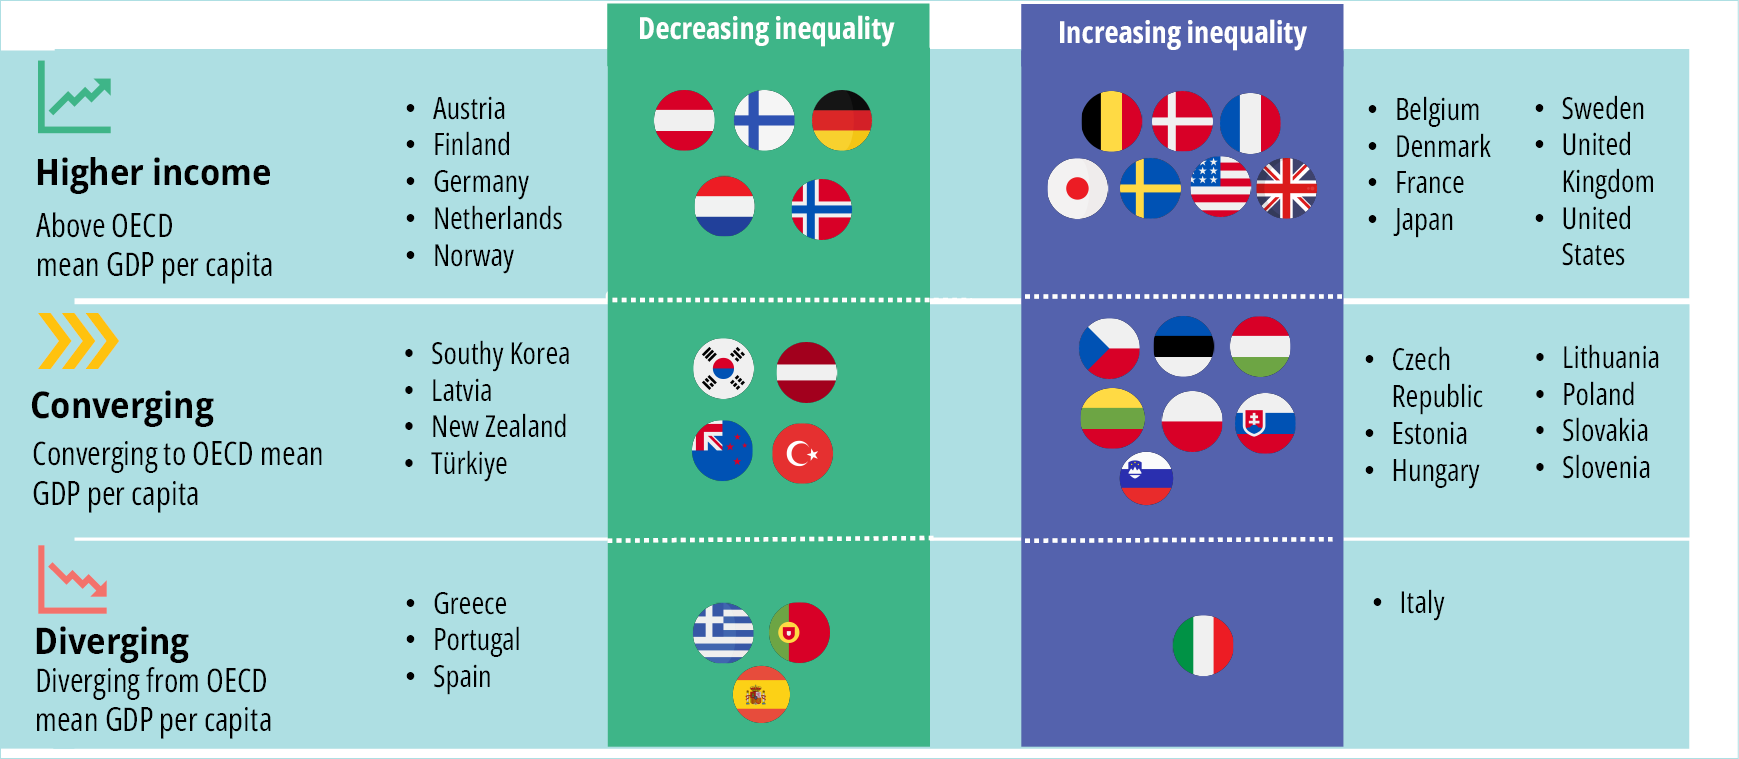 This infographic illustrates trends in regional inequalities in OECD countries over the past 20 years